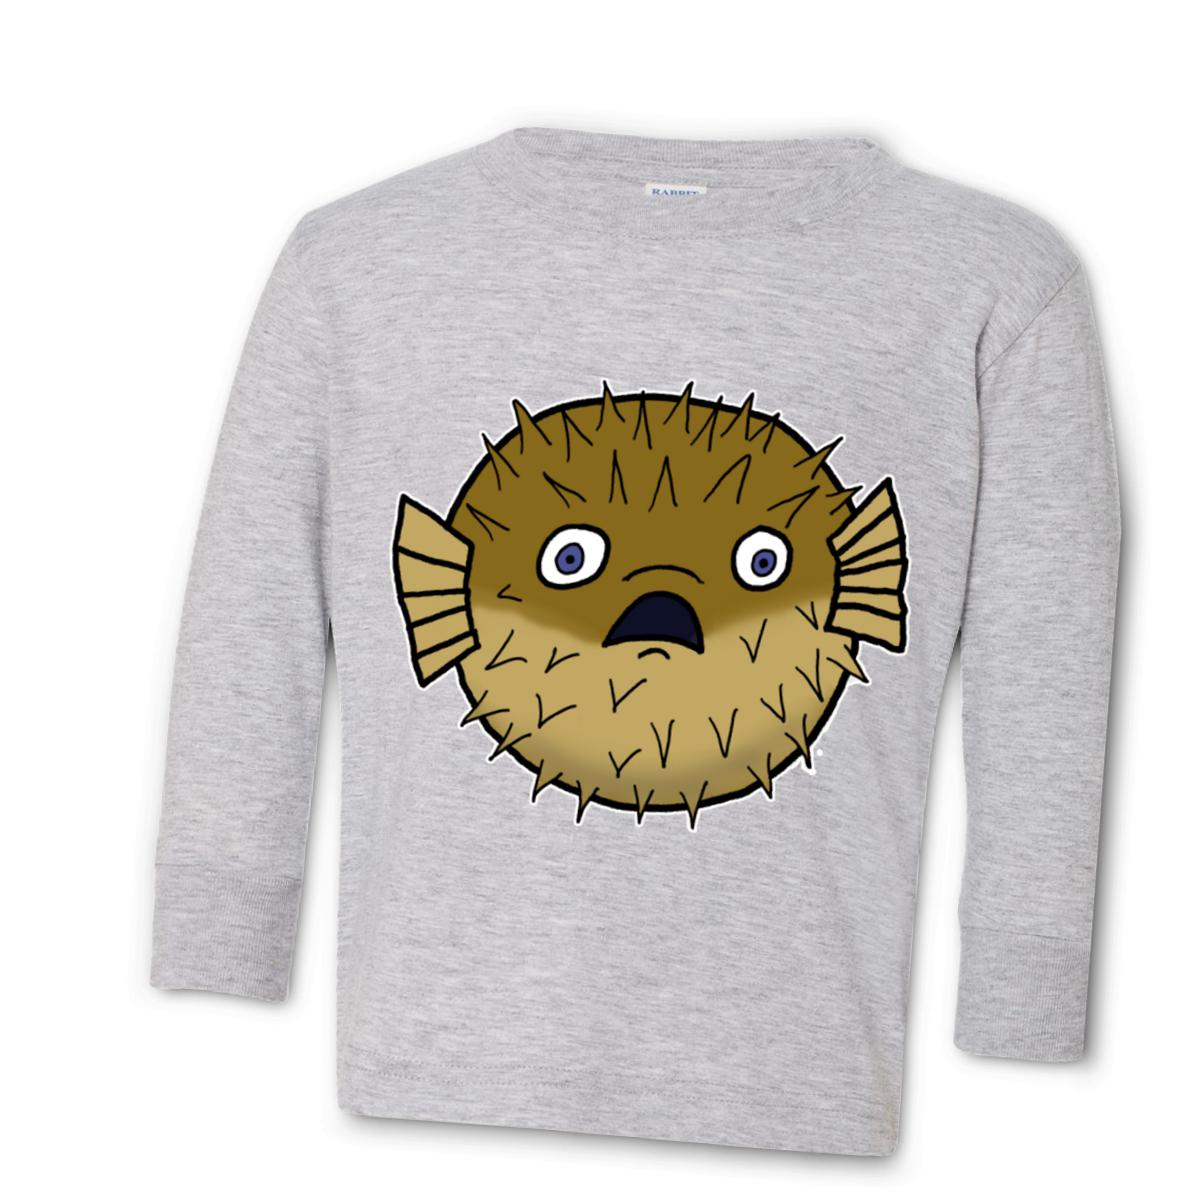 Puffer Fish Toddler Long Sleeve Tee 4T heather